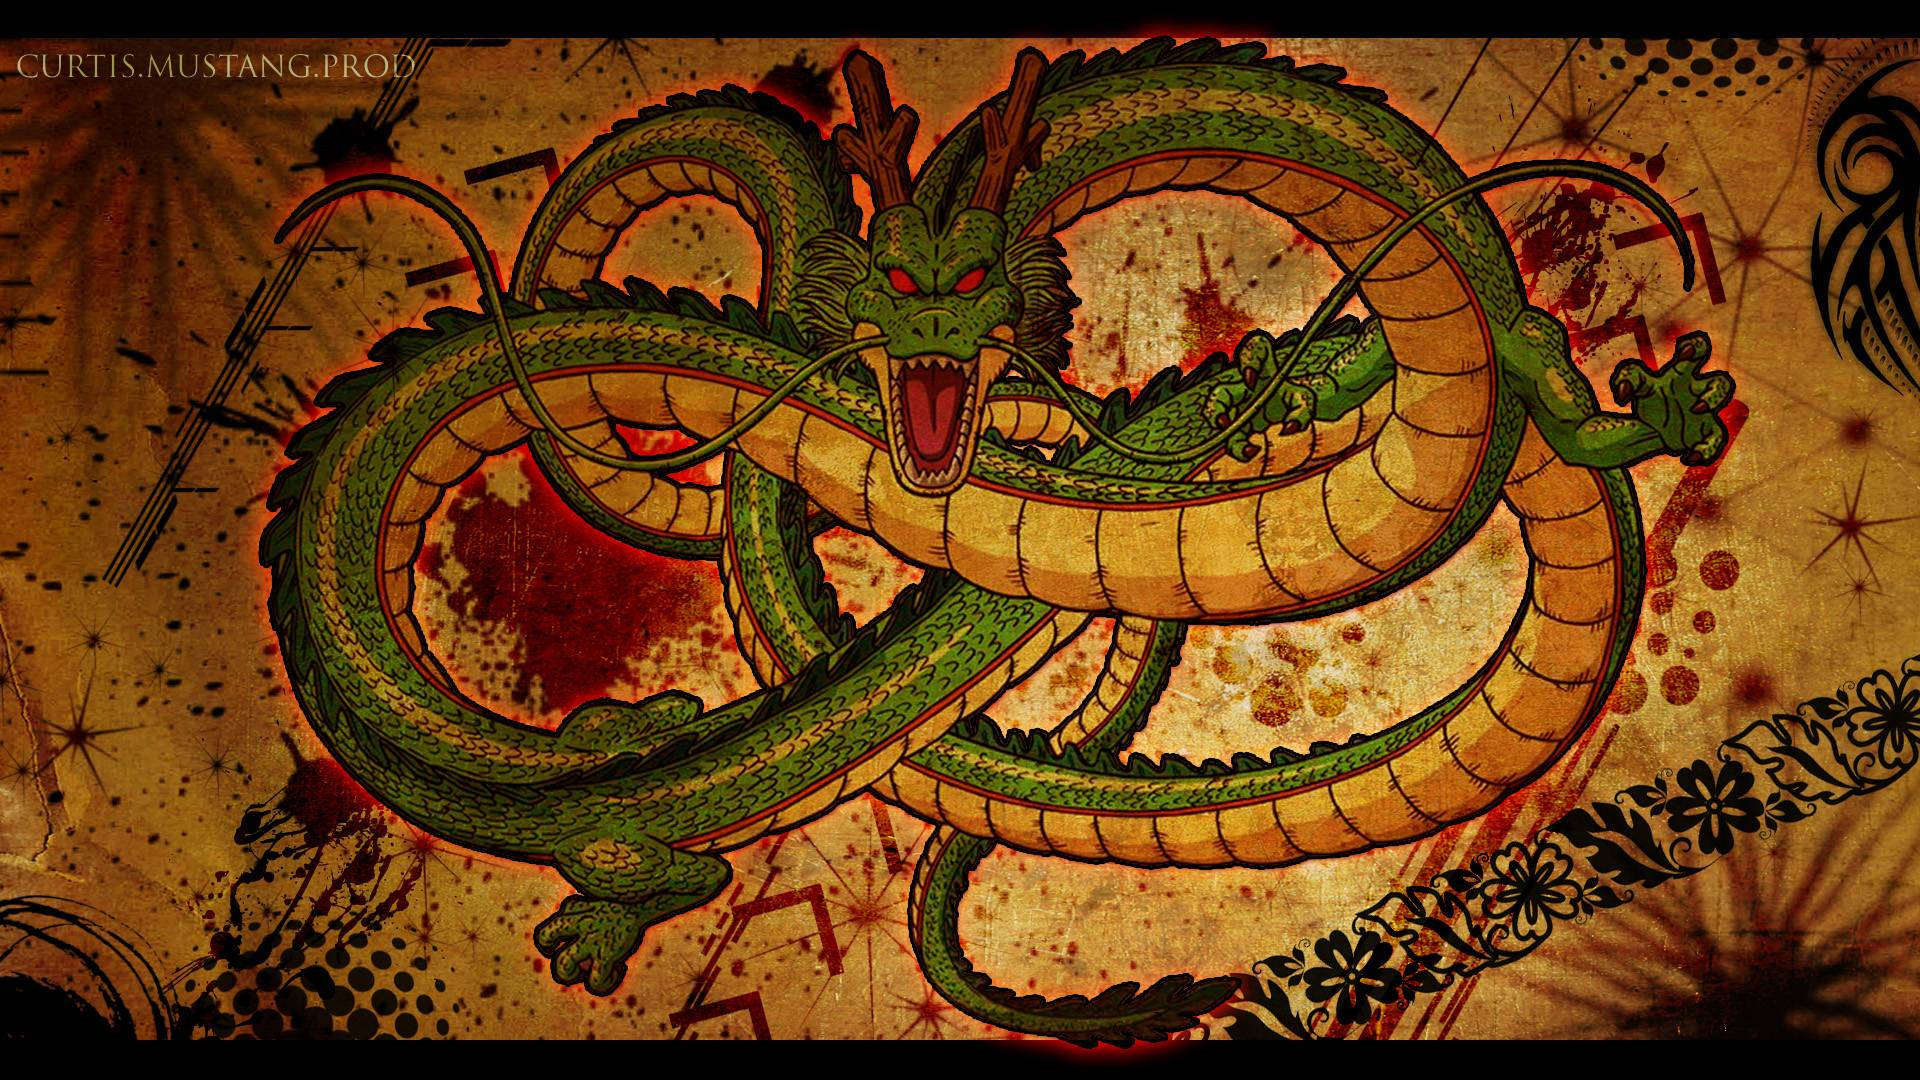 Welcome the divine dragon Shenron, the wish-granting dragon from the Dragon Ball franchise! Wallpaper